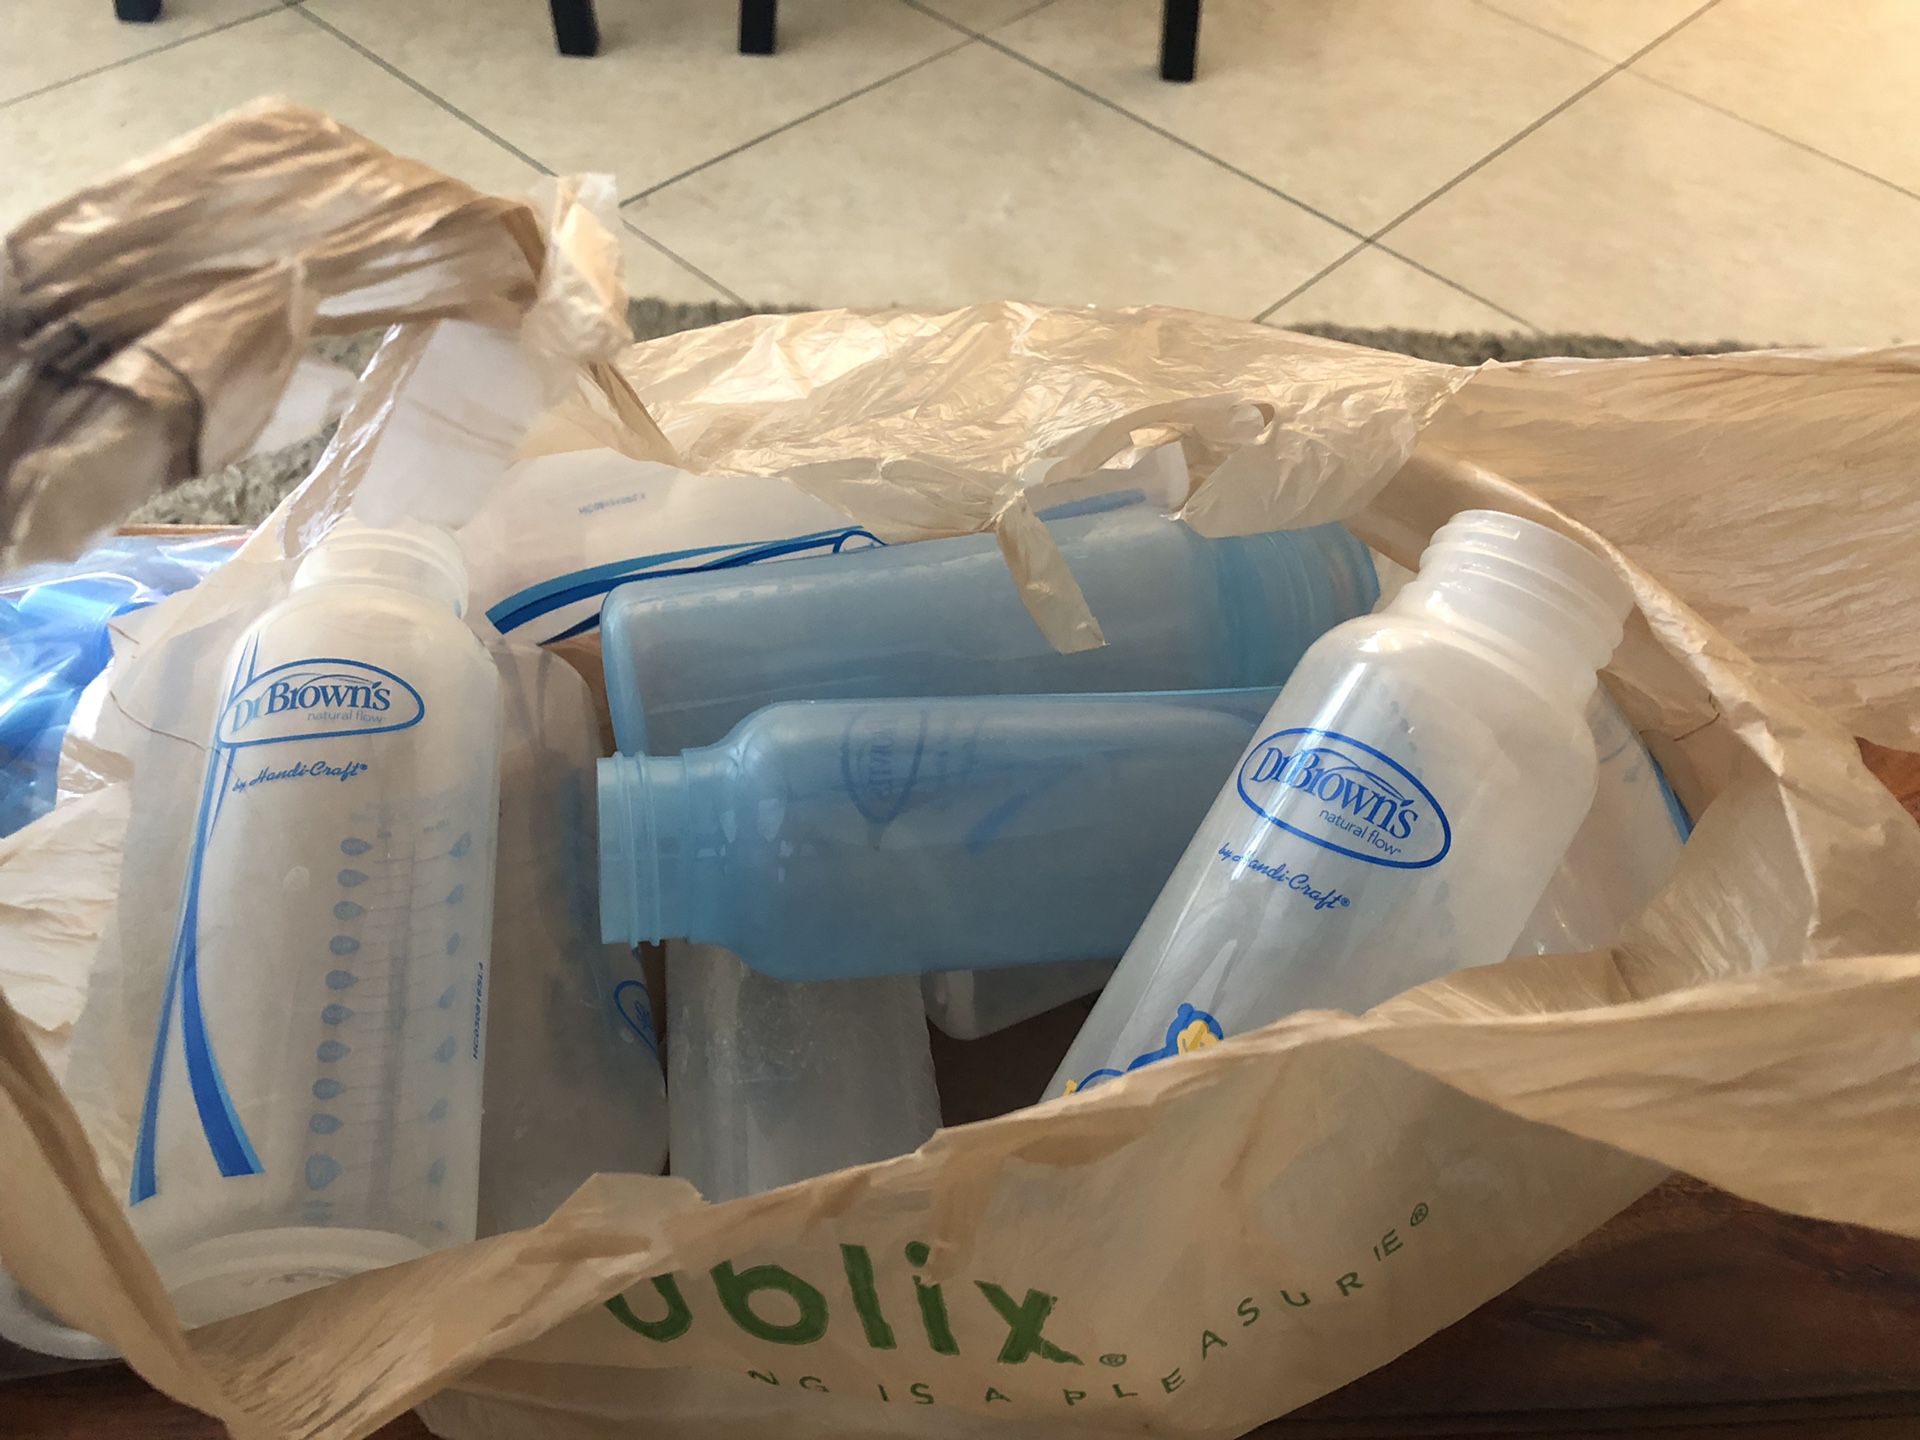 Free 12 Dr Browns baby bottles and parts.